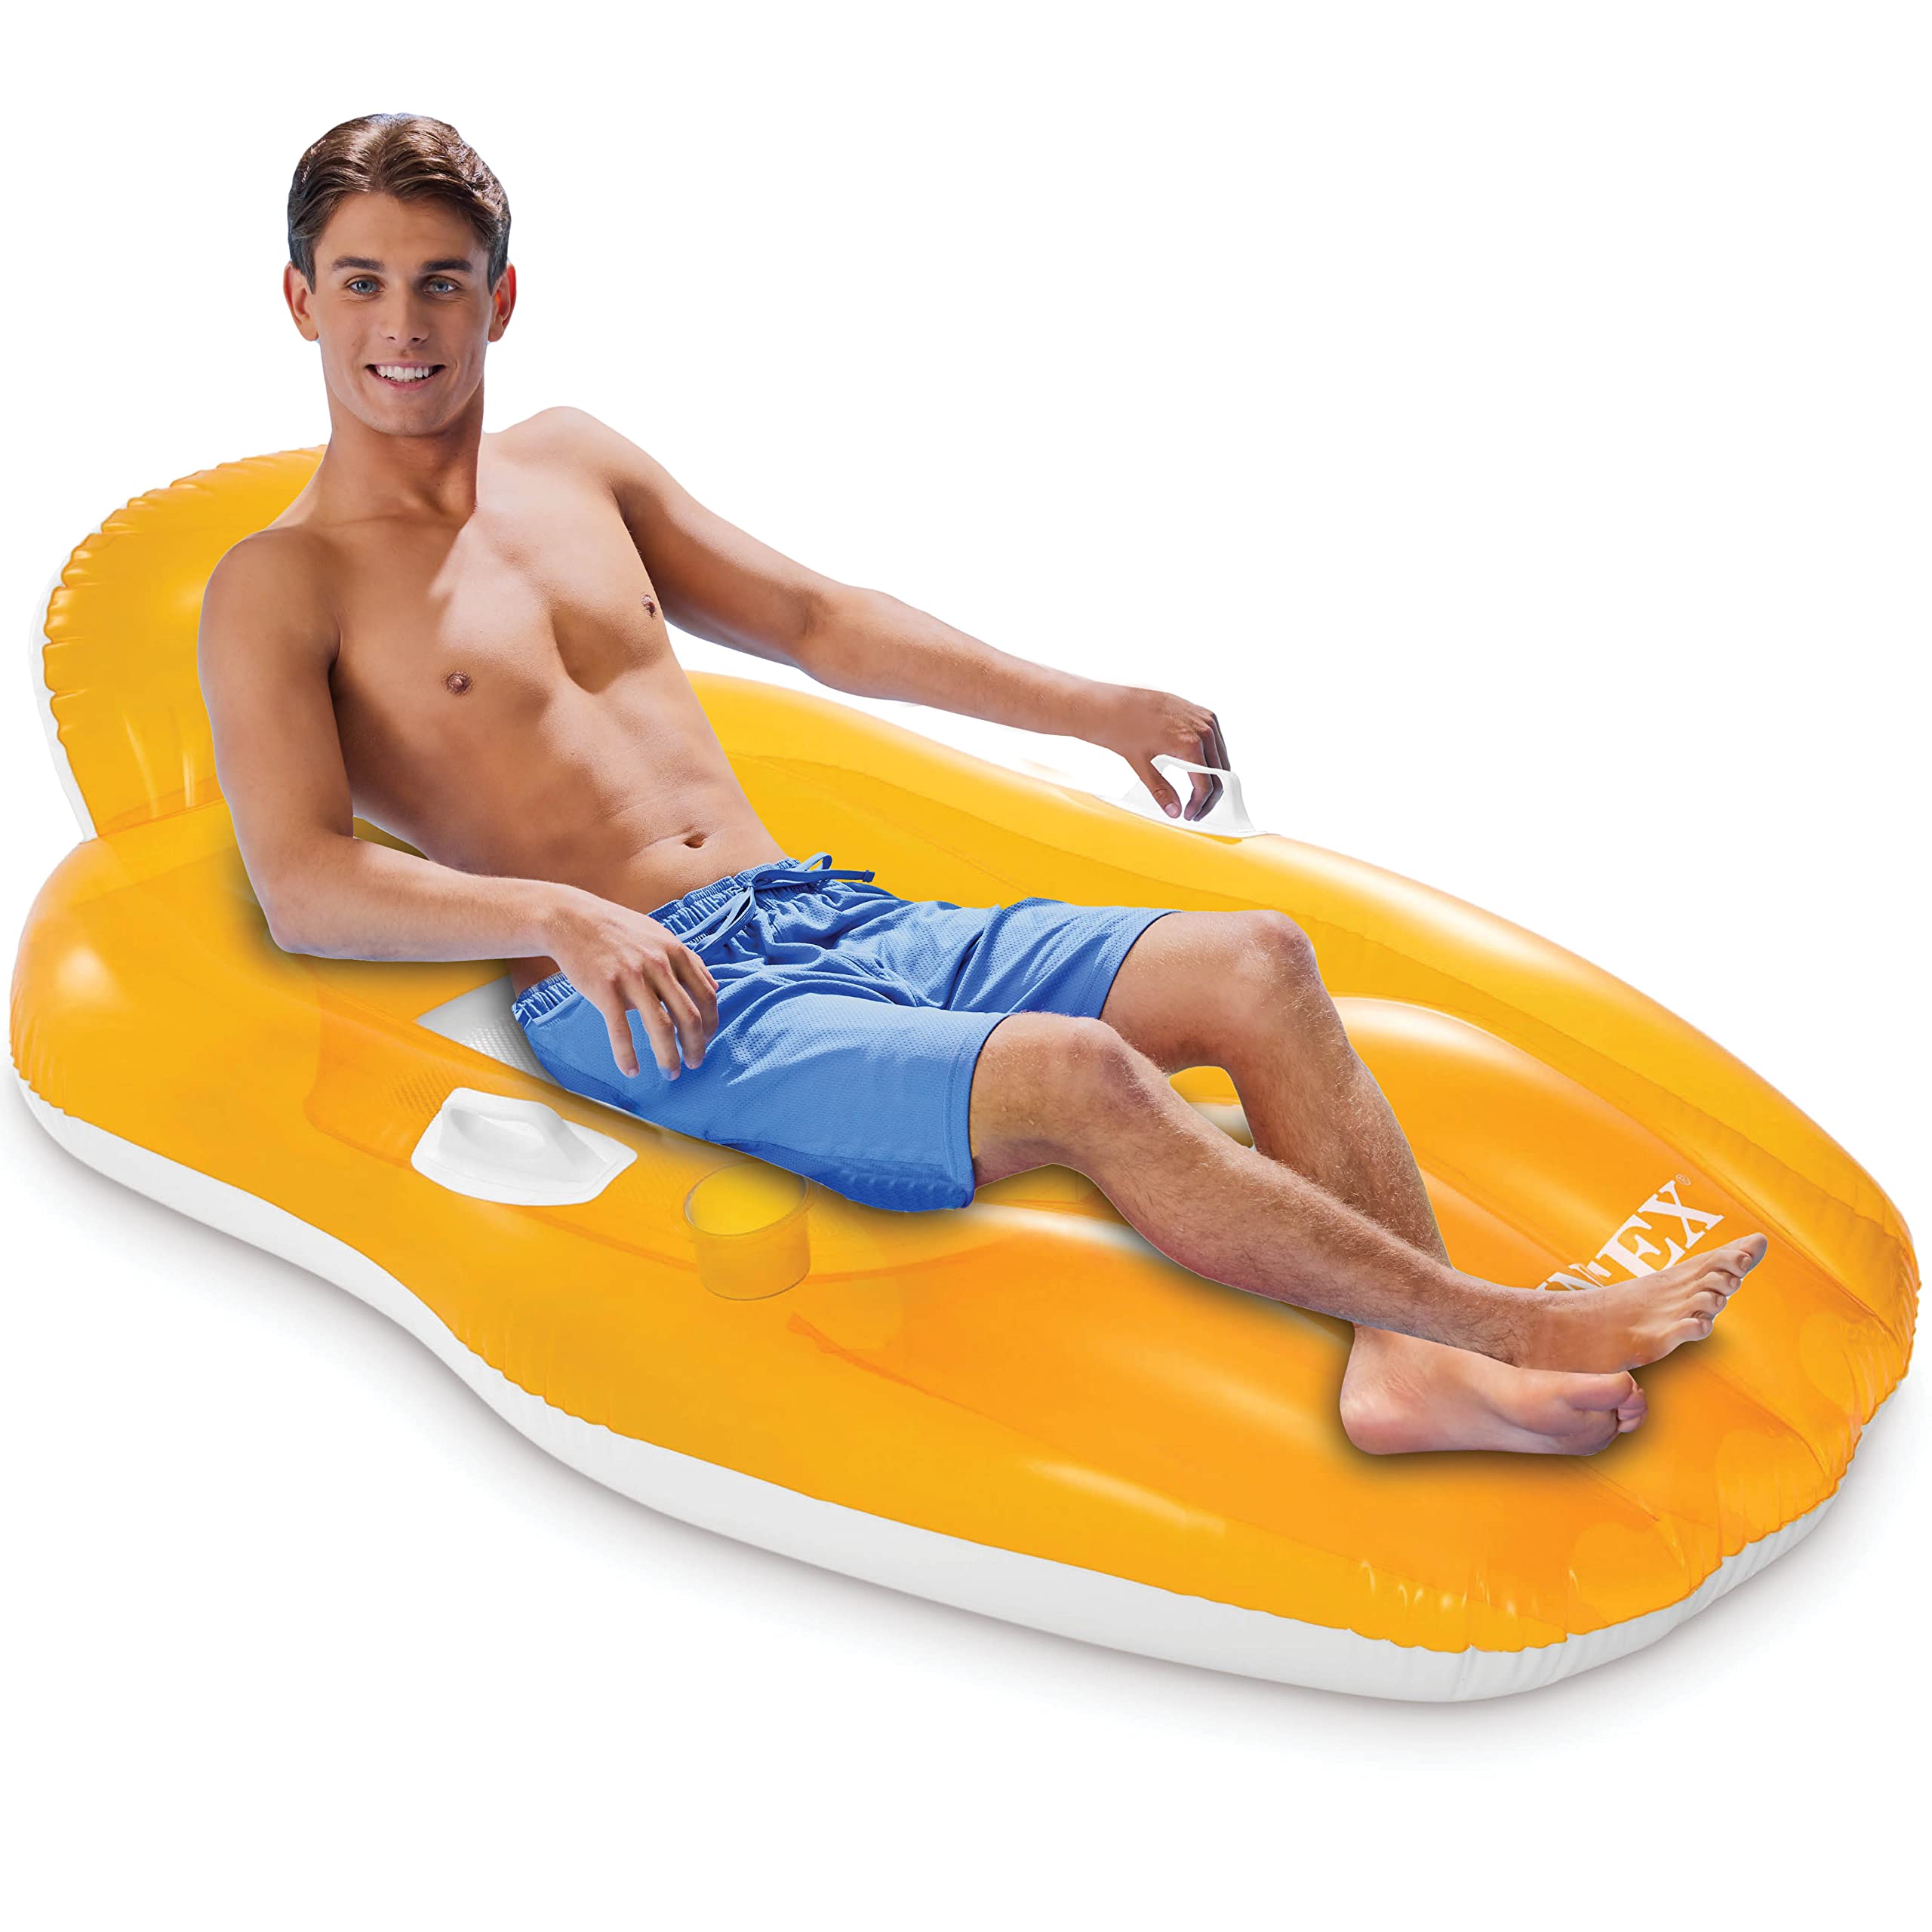 Pool Floats, Inflatable Pool Lounger, with Headrest, Handles, and Cup Holder - Pool Floats Adult, Comes in 2 Fun Colors (Color May Vary, Yellow/Orange) (64" X 41") Relaxing Floats for Swimming Pool.  - Like New